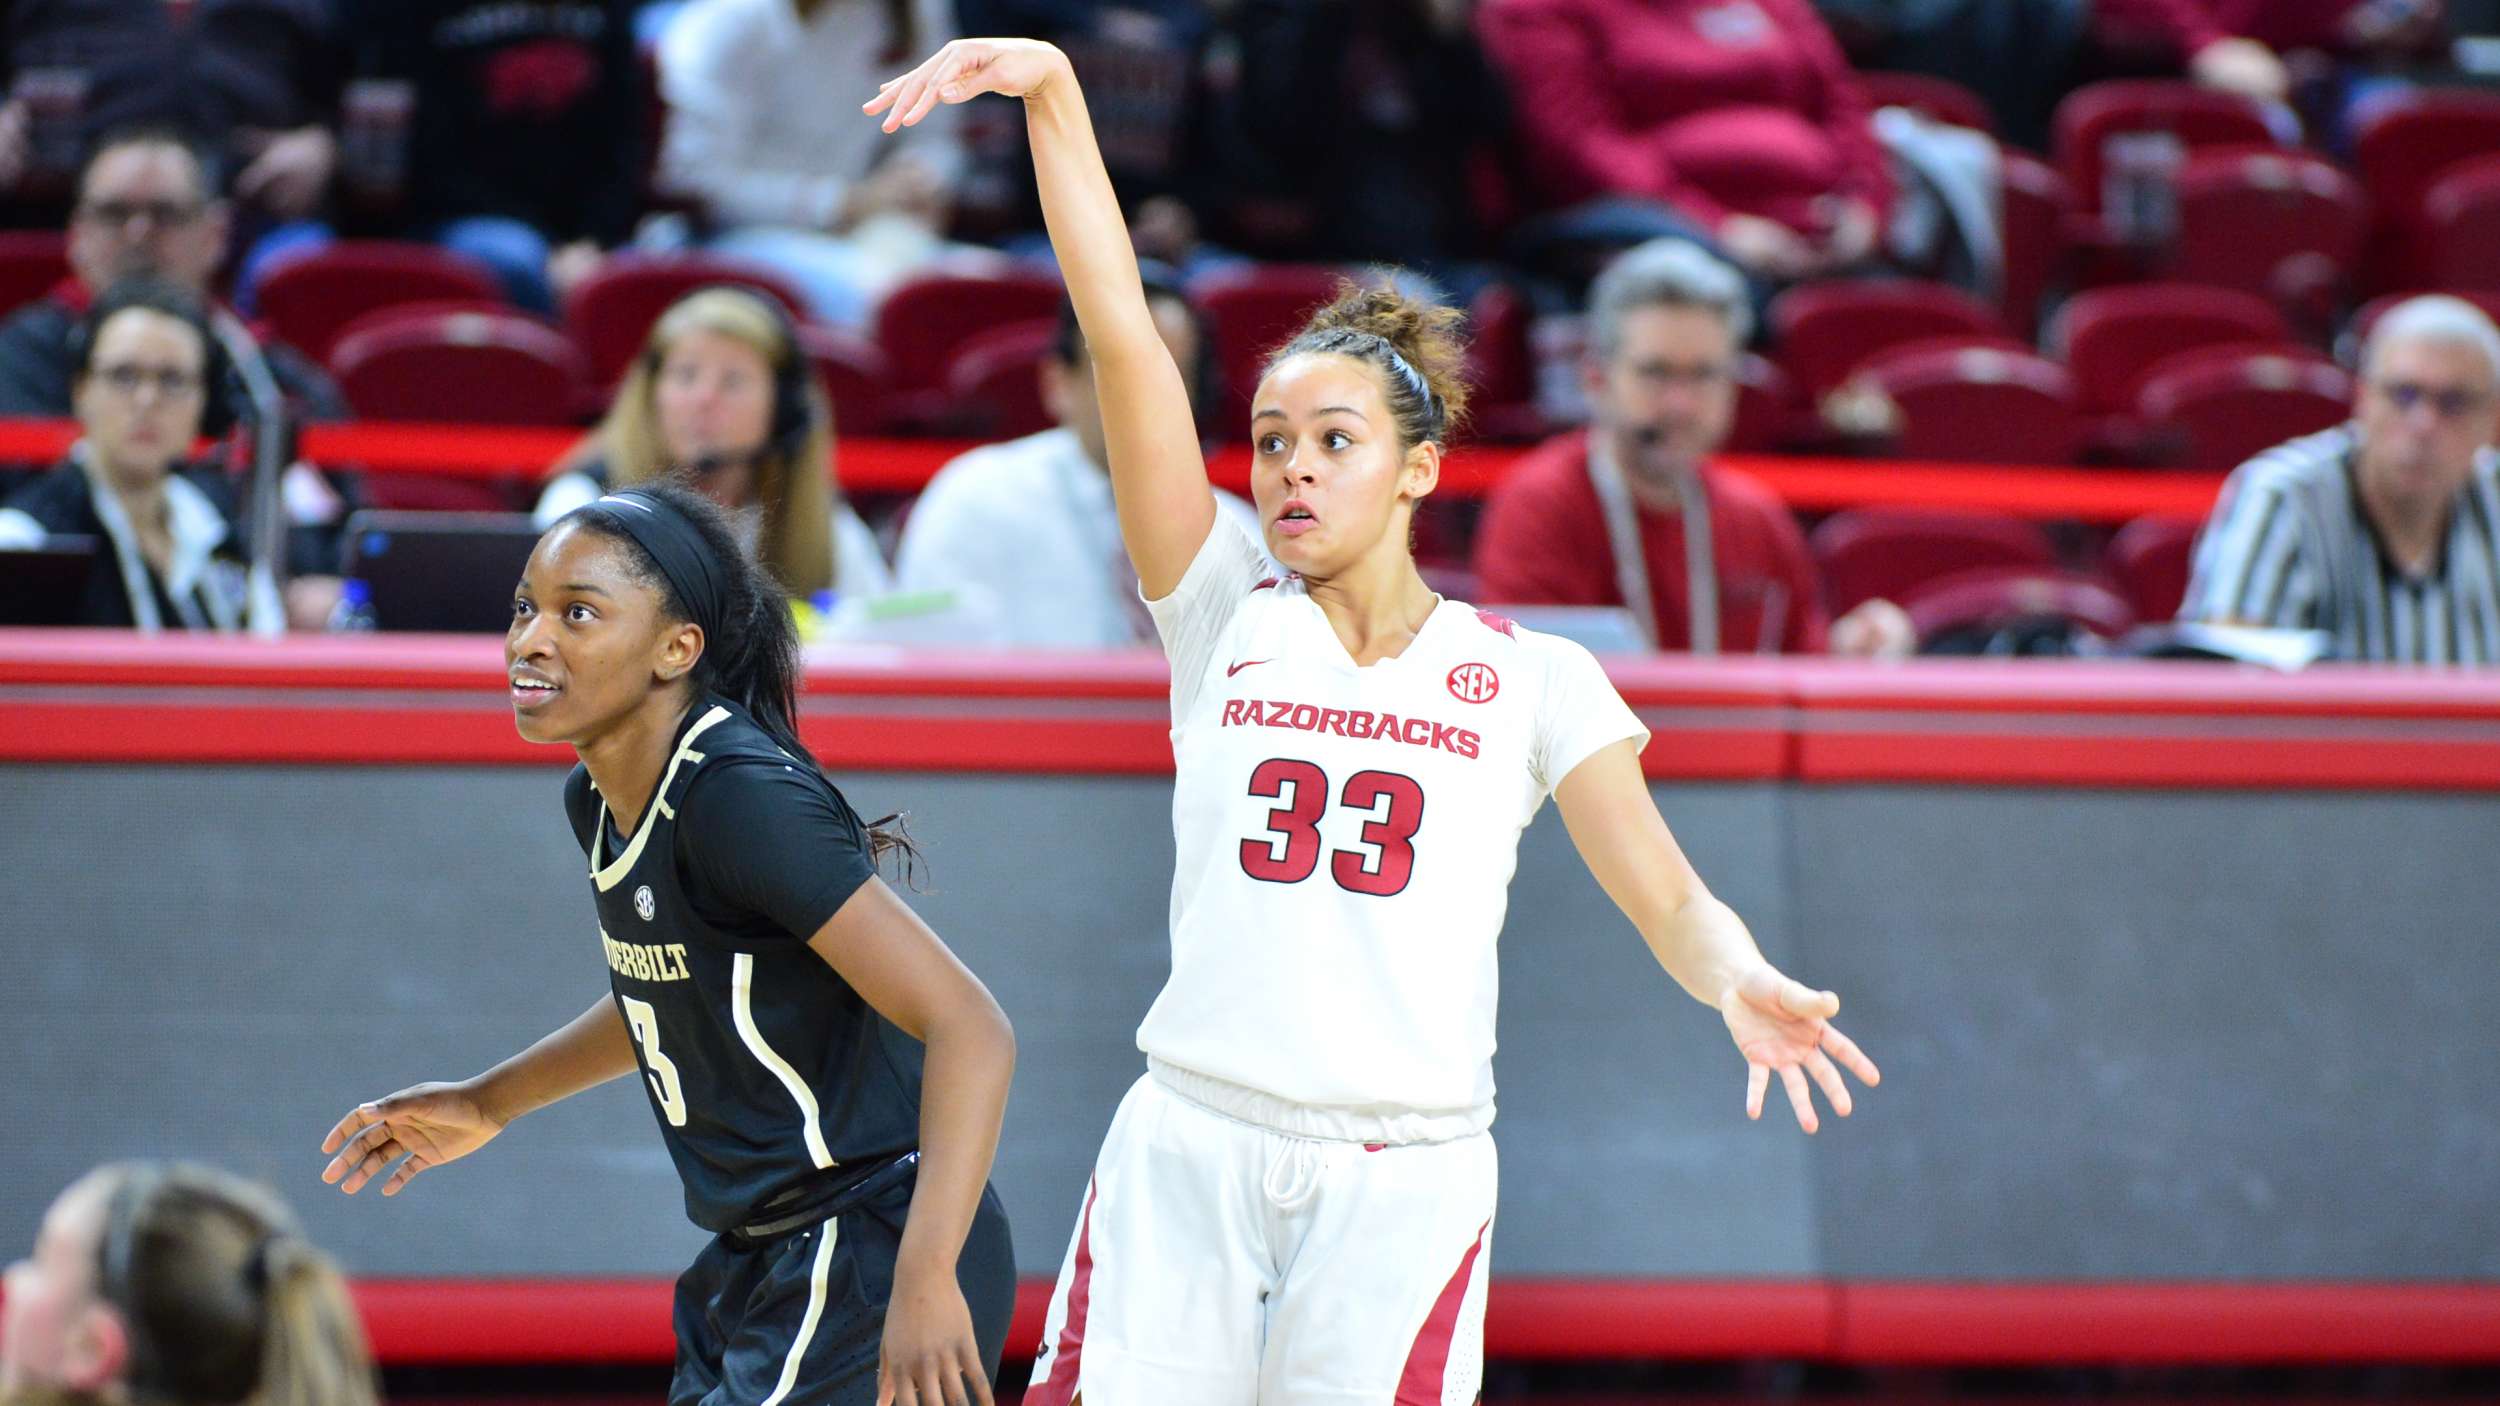 Chelsea Dungee (Cherokee) added 19 Points for the Razorbacks who win on the road at Tennessee